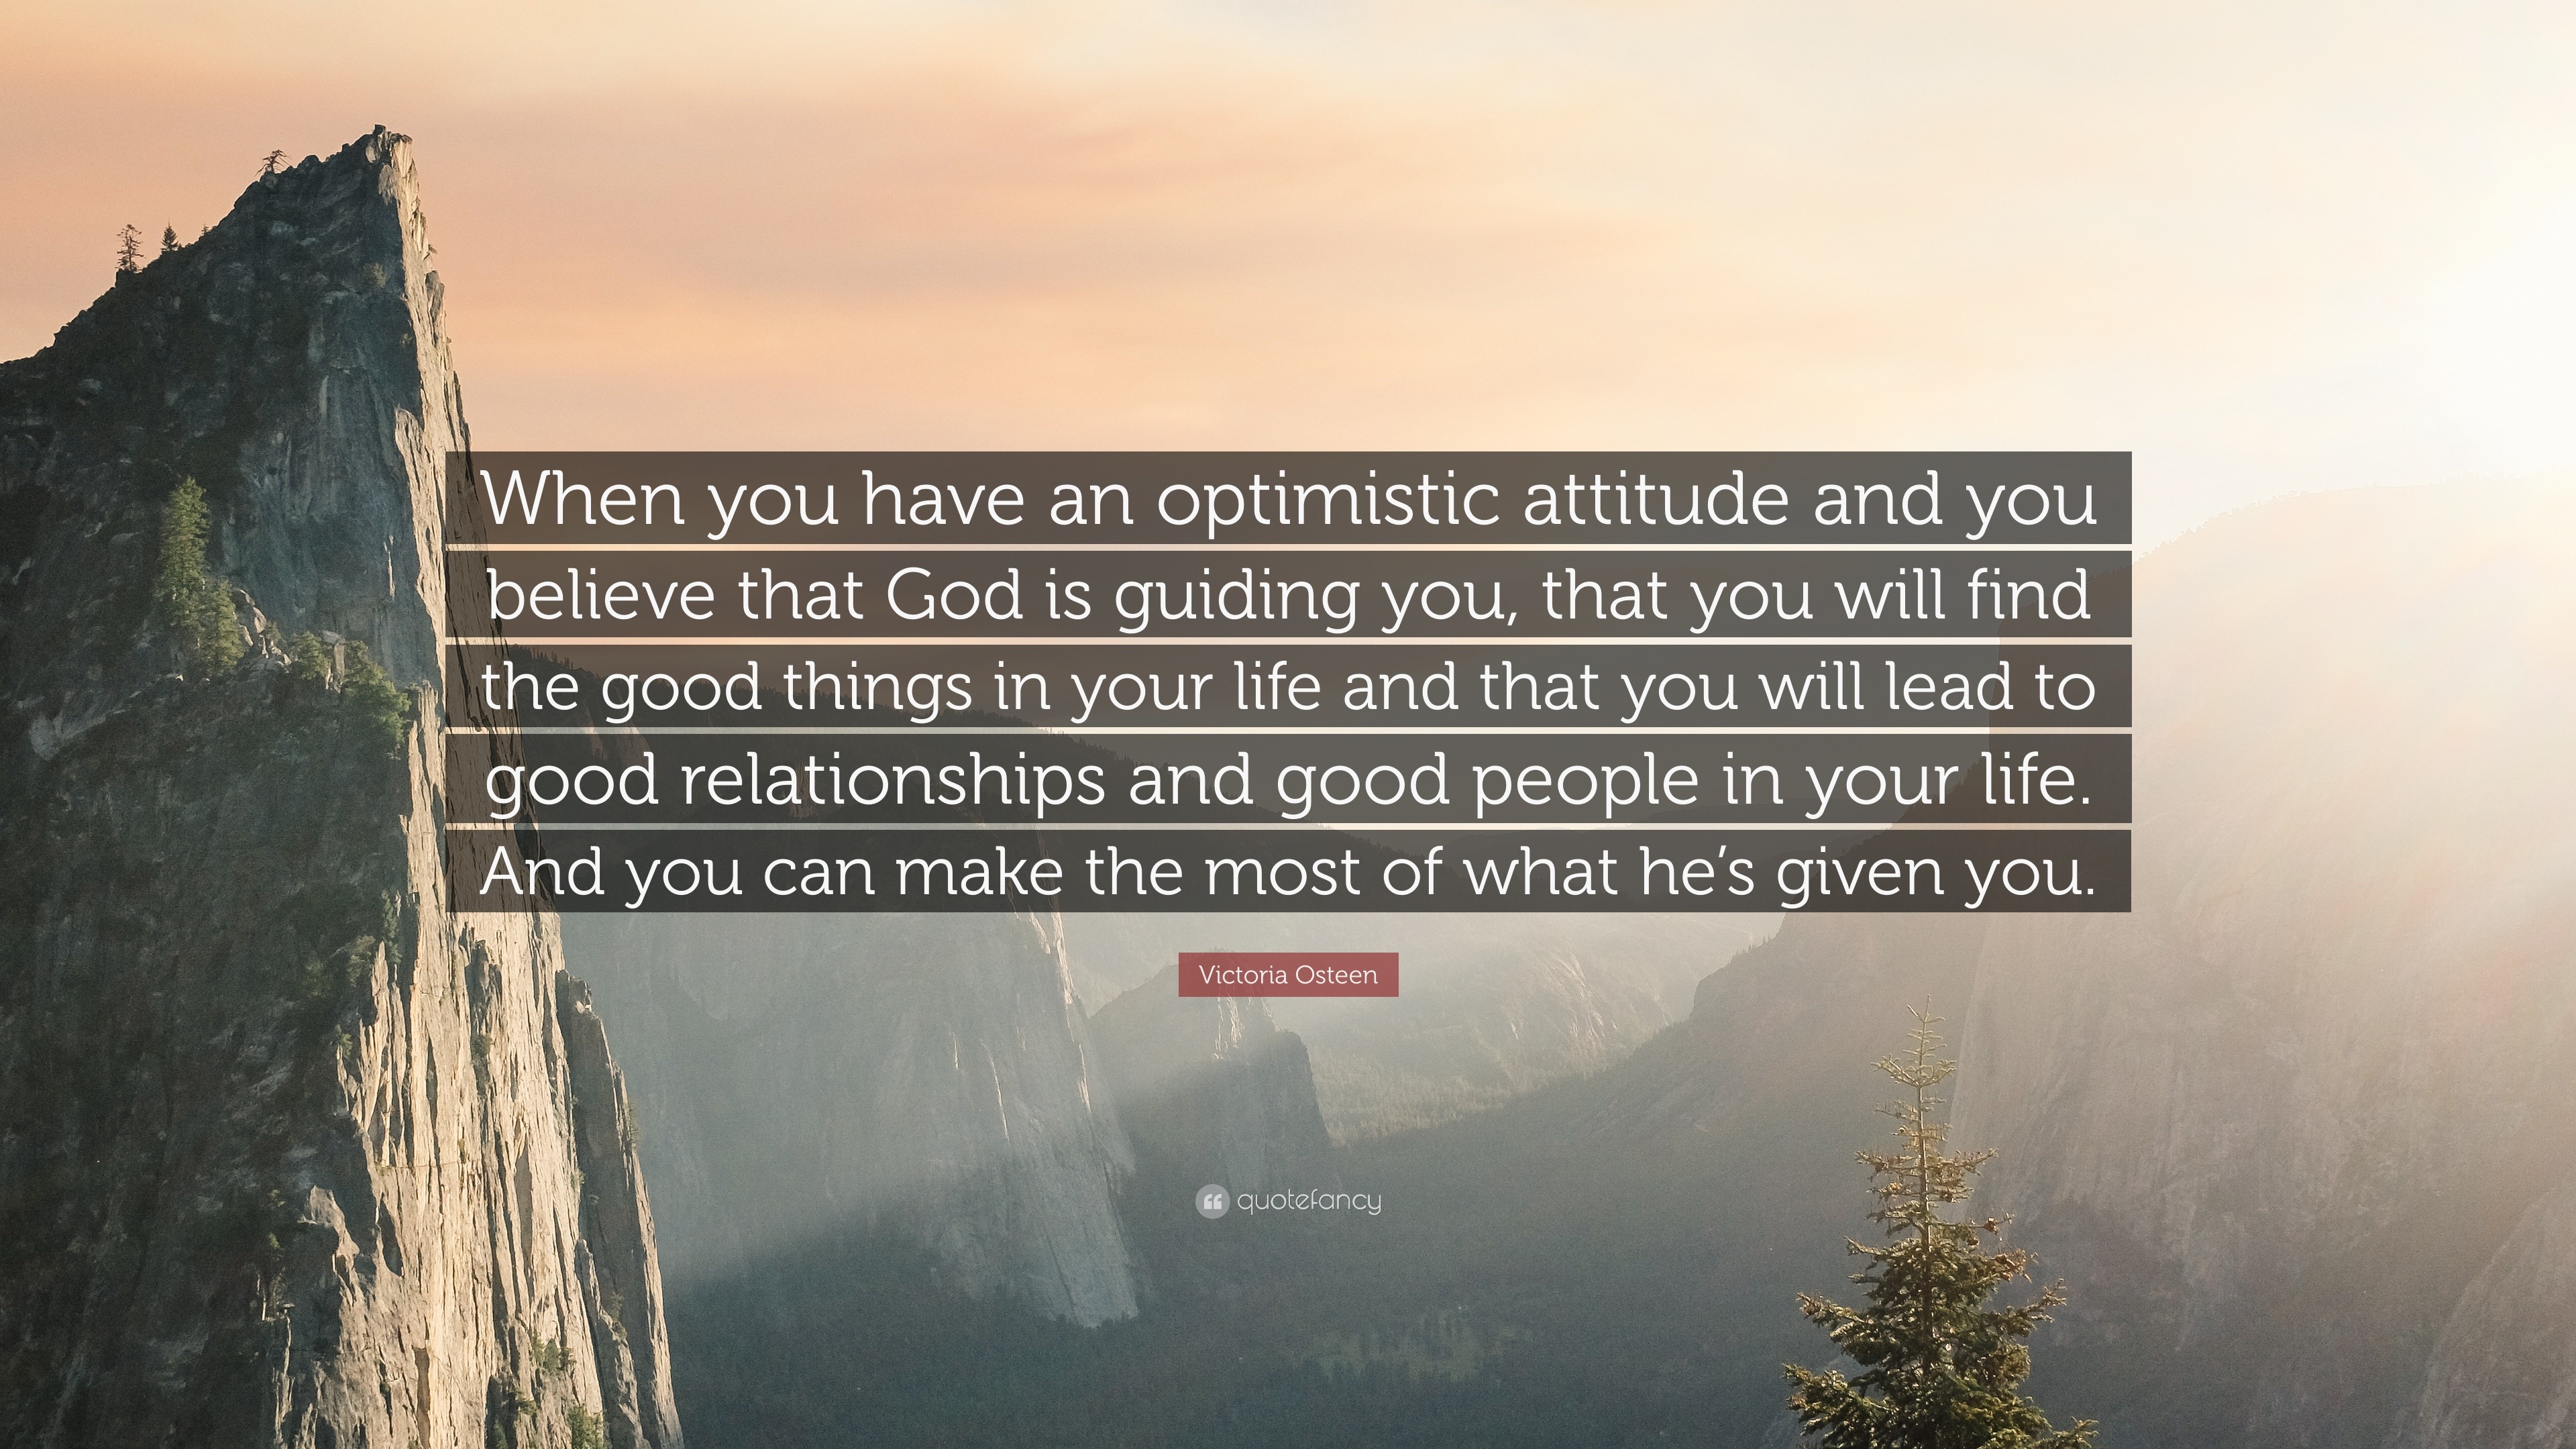 Victoria Osteen Quote “When you have an optimistic attitude and you believe that God